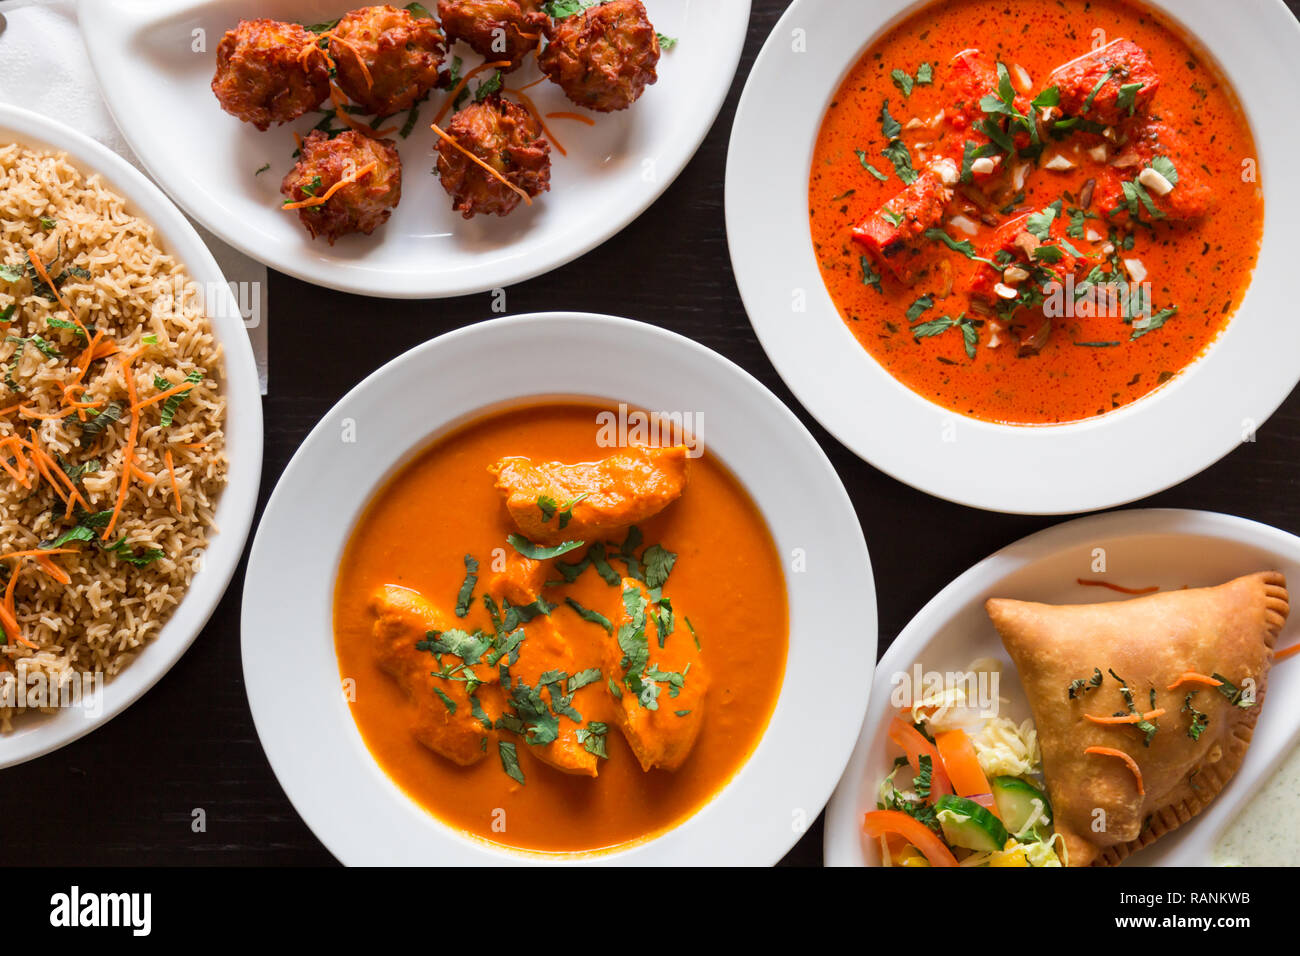 Delicious Indian food, for deliver at home, dinner with family and friends Stock Photo